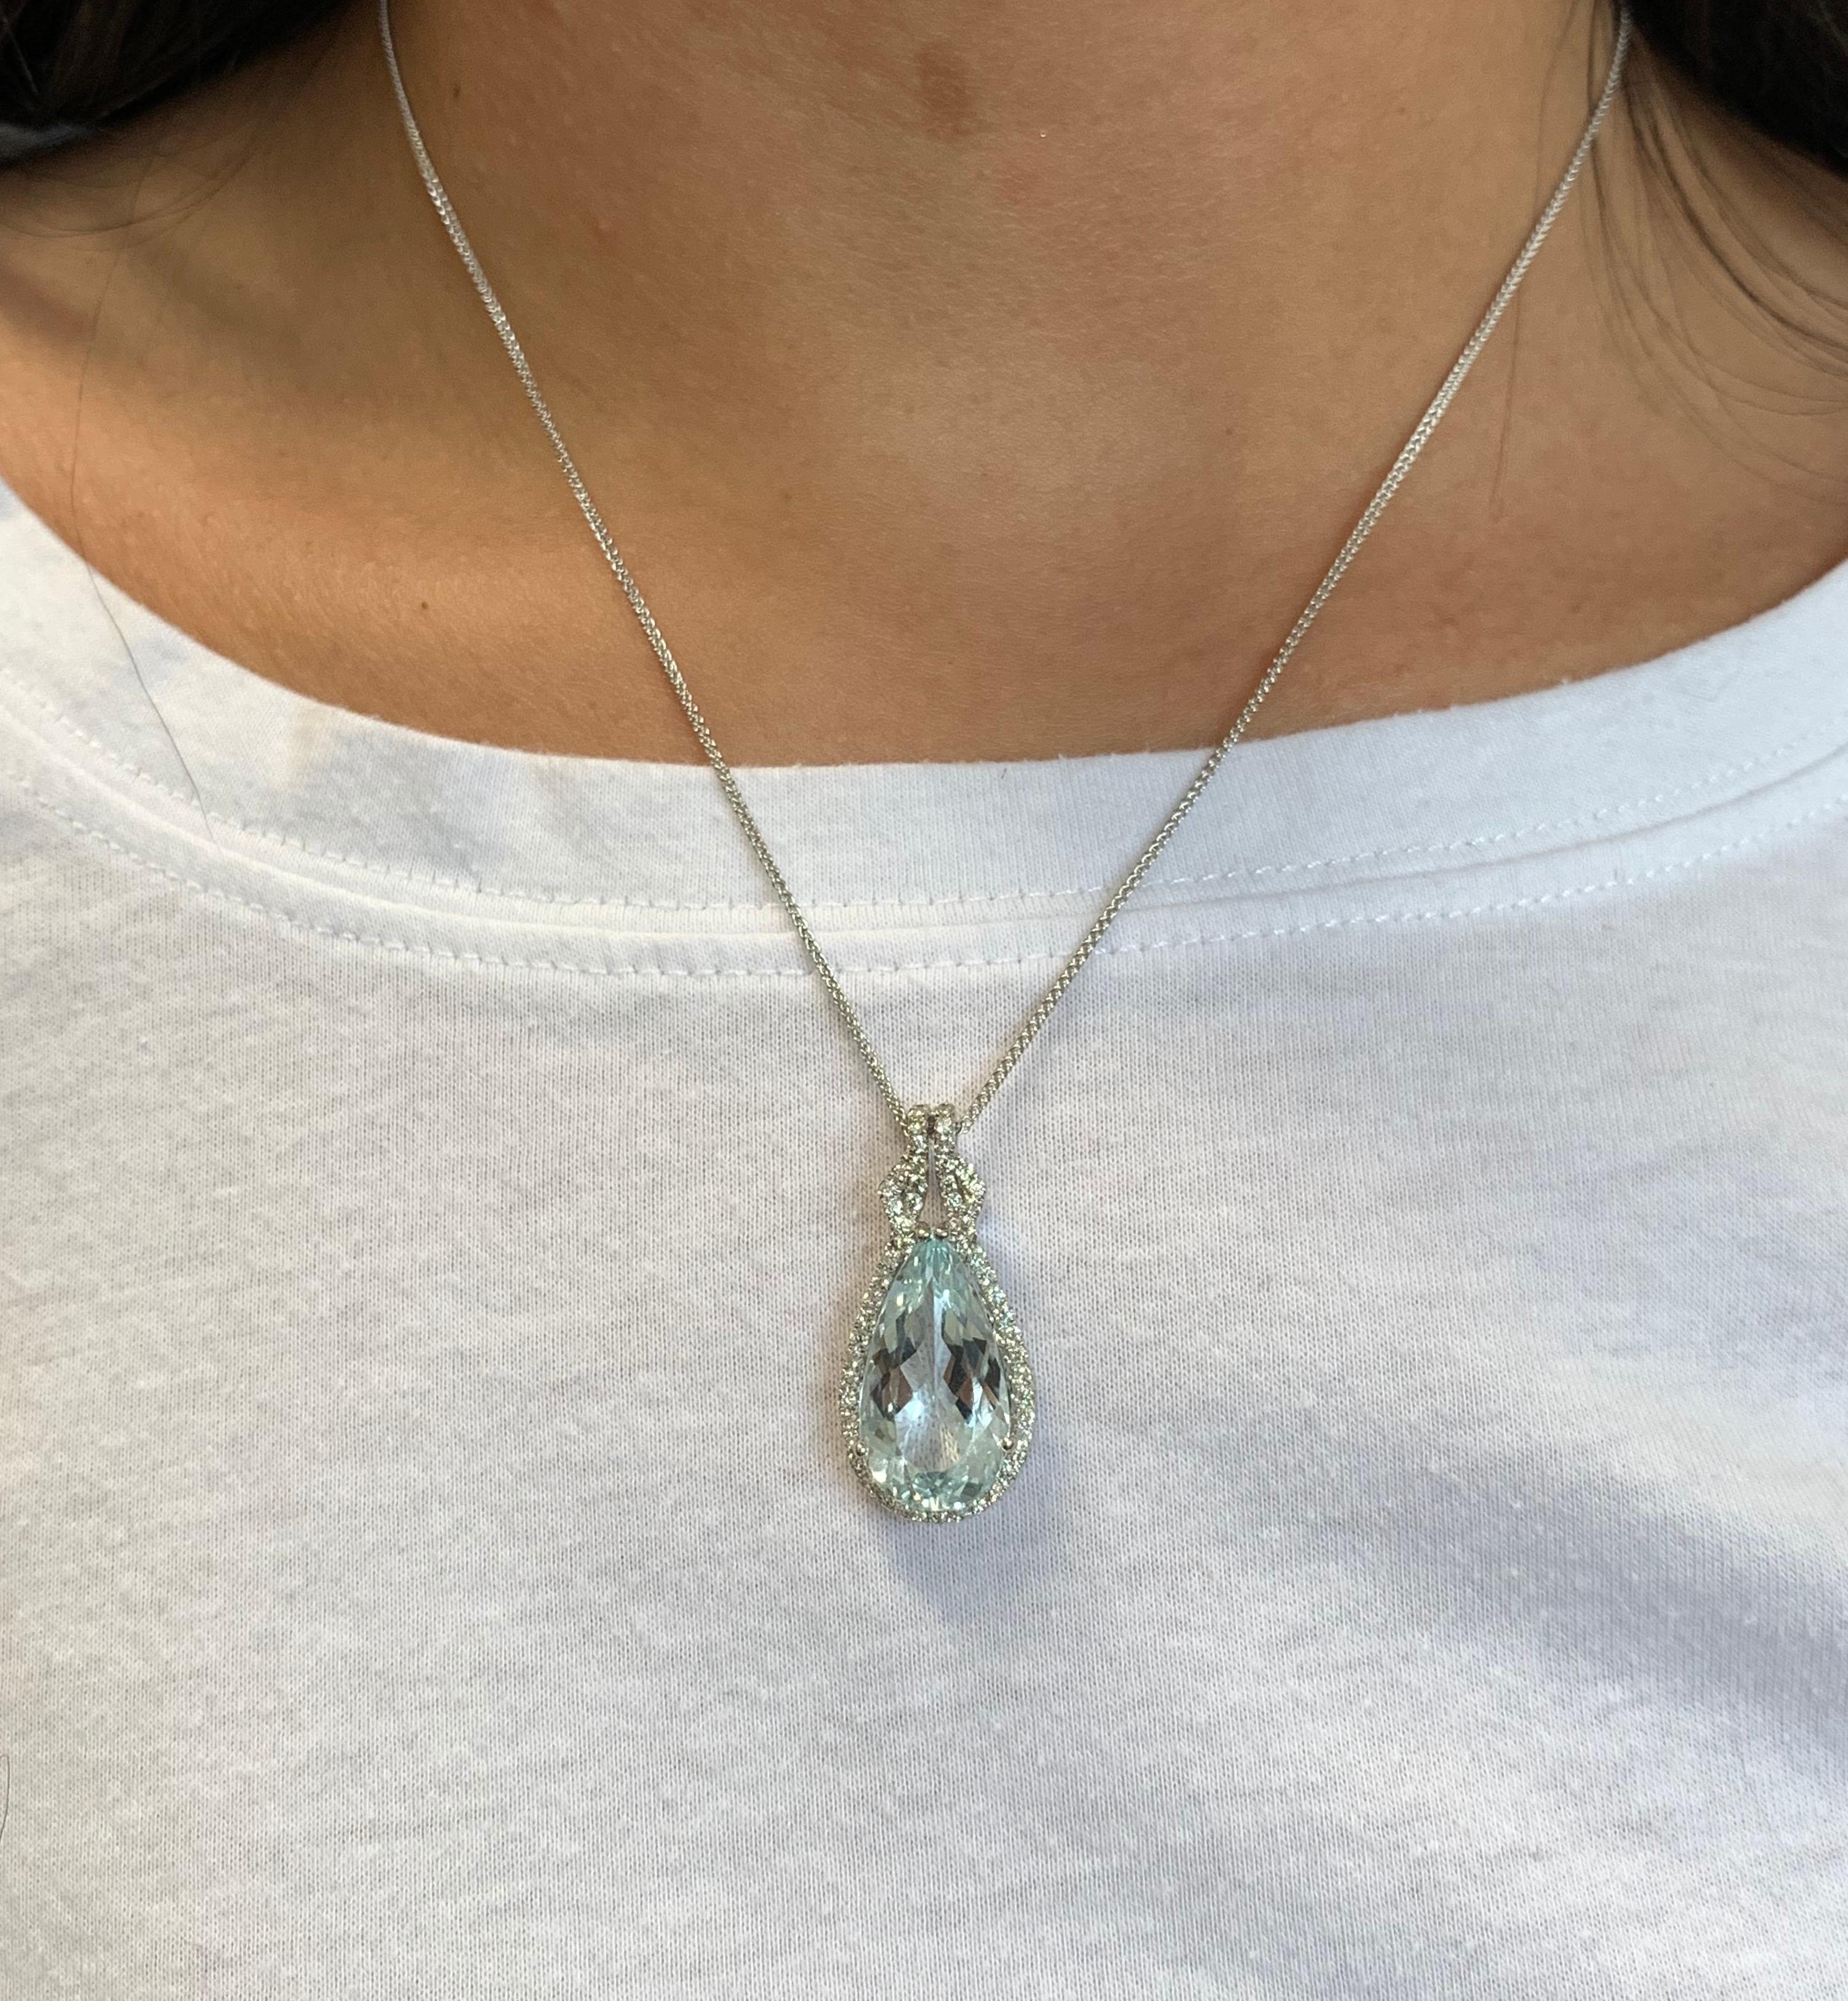 Material: 14k White Gold 
Center Stone Details: 1 Pear Shaped Aquamarine at 7.50 Carats - Measuring 11 x 20 mm
Diamond Details:  Round Brilliant Diamonds at 0.56 Carats.  SI Quality /  H-I Color
Chain Length:  17 Inch

Fine one-of-a-kind